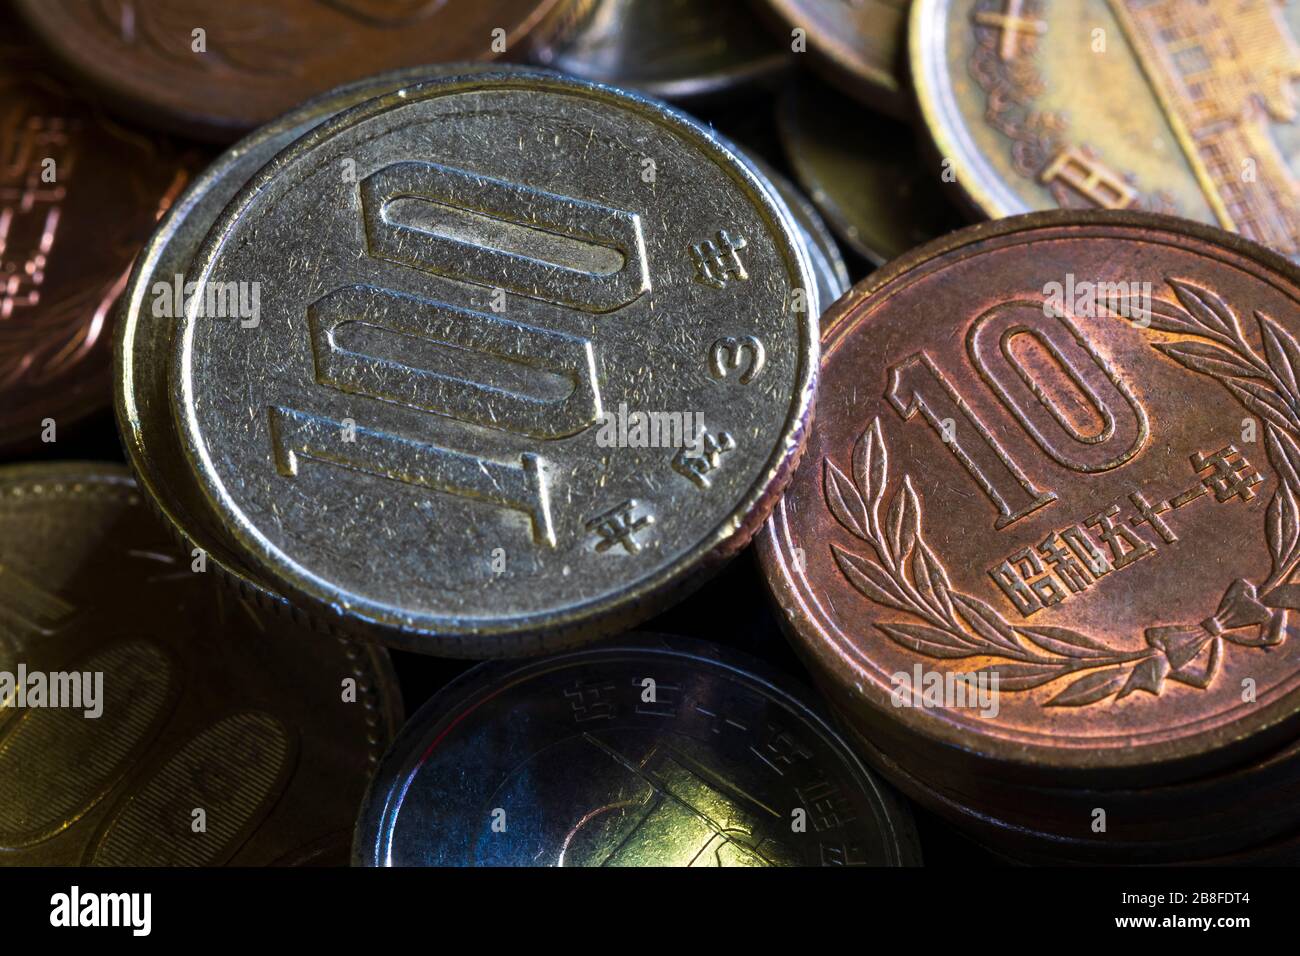 A mix of Japanese Yen coins Stock Photo